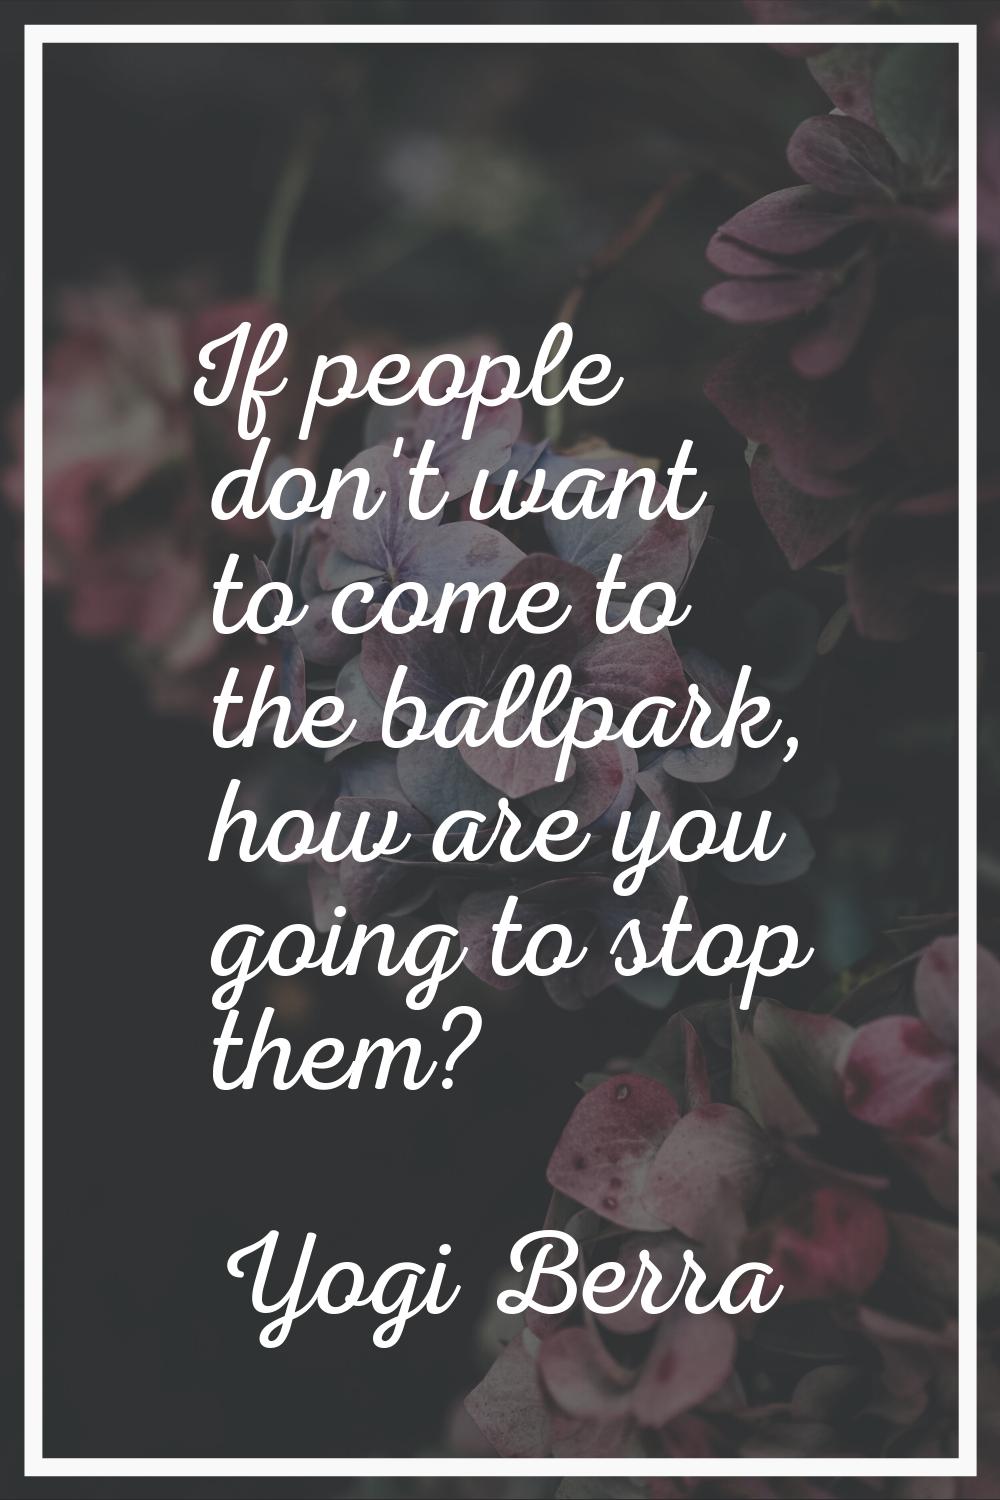 If people don't want to come to the ballpark, how are you going to stop them?